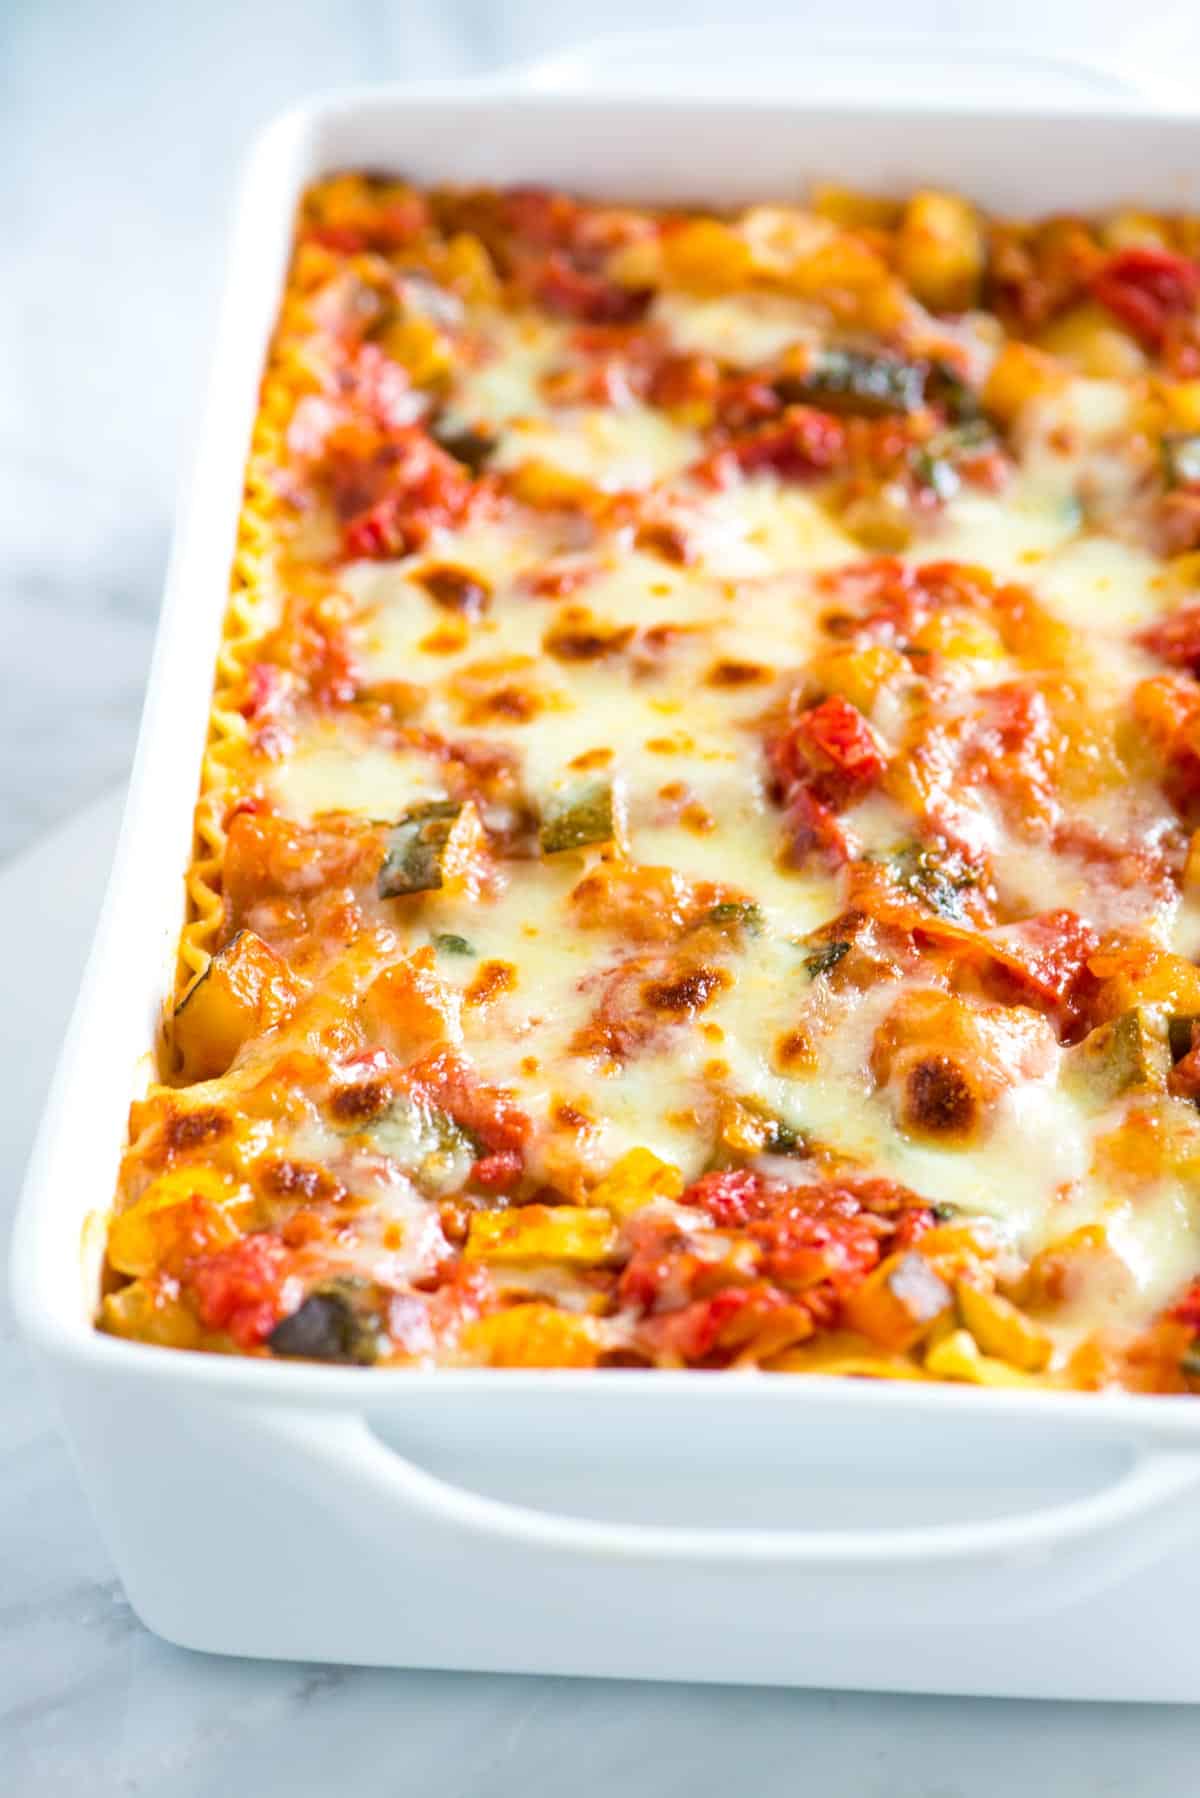 This vegetable lasagna is a reader favorite! Tender vegetables, a light tomato sauce, and lots of cheese make this the best vegetable lasagna recipe, ever.